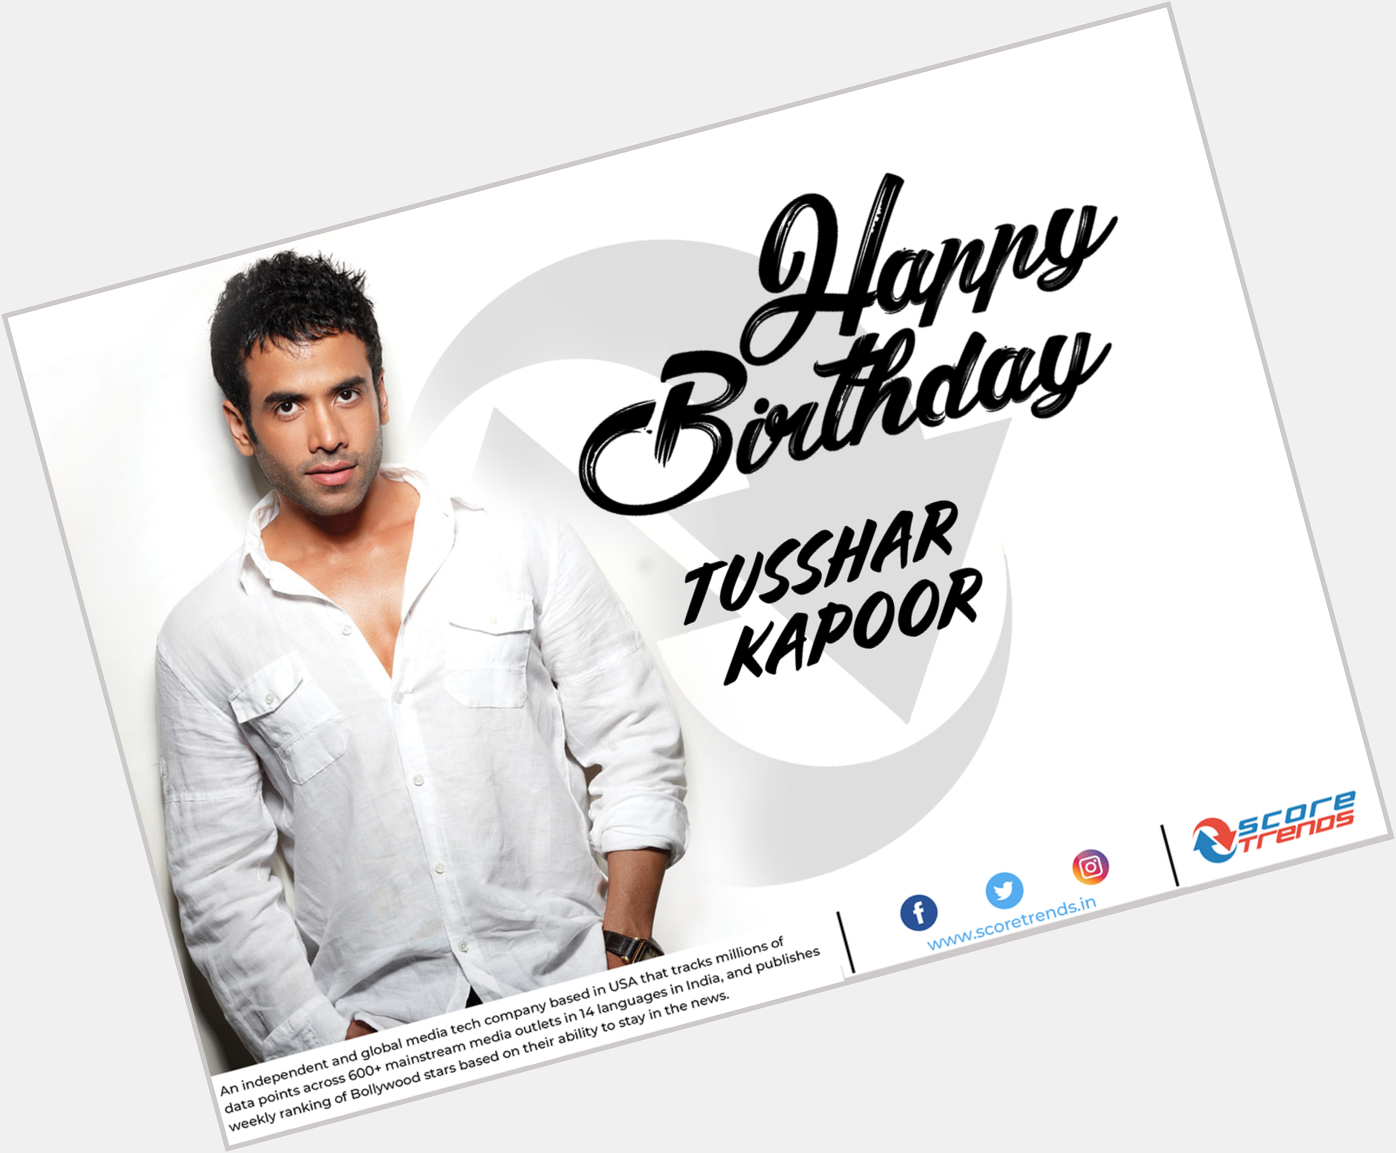 Score Trends wishes Tusshar Kapoor a Happy Birthday!! 